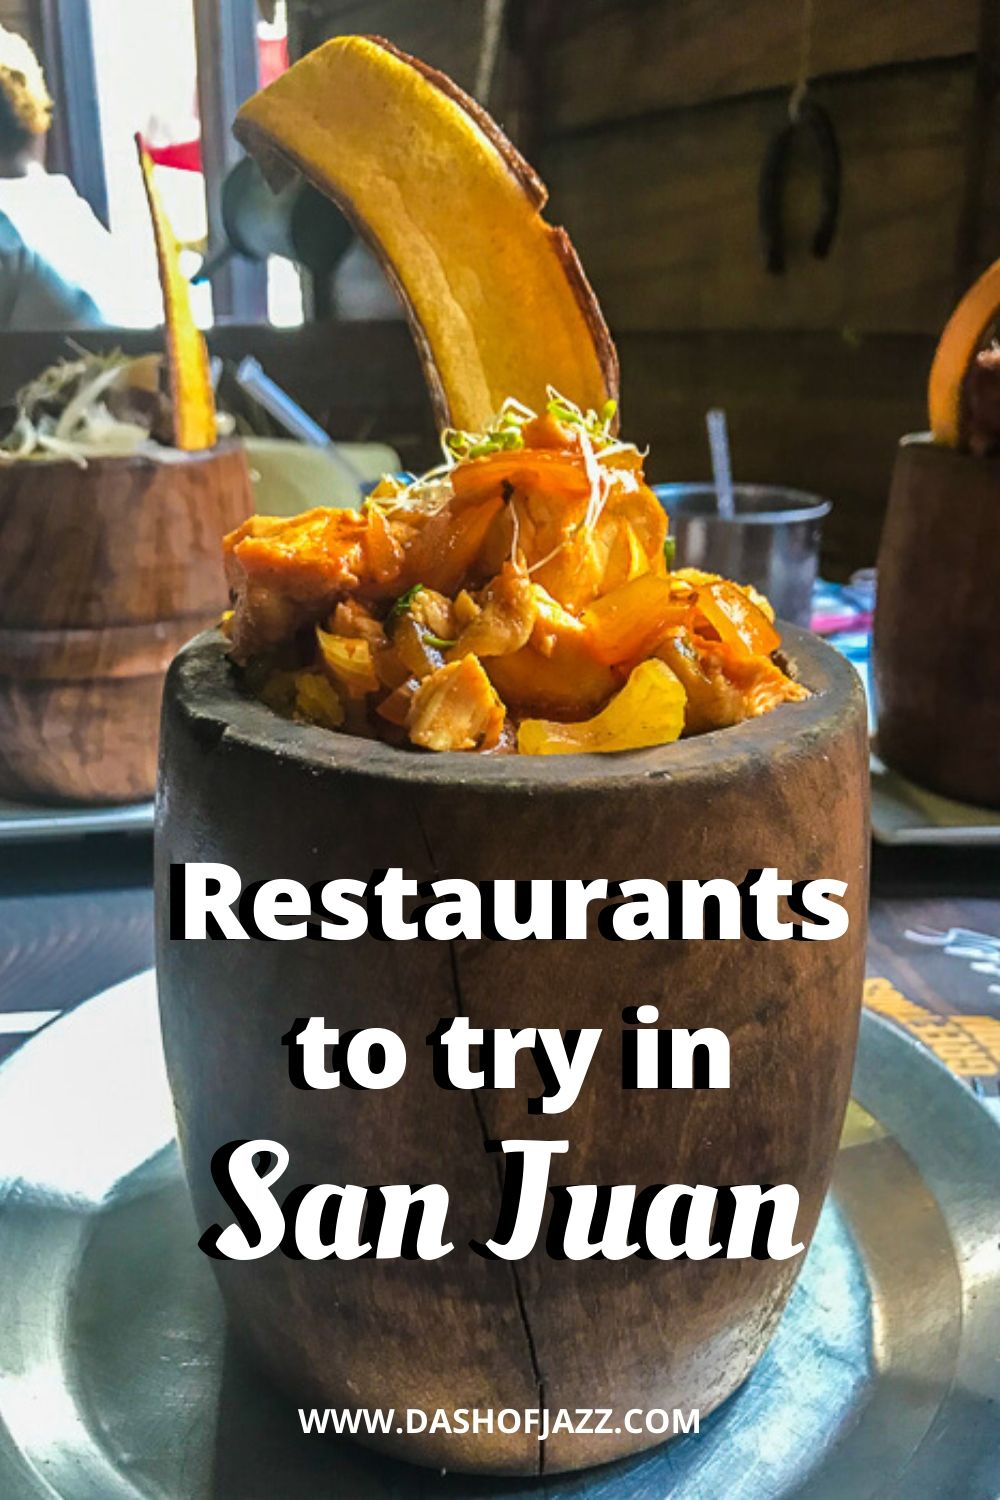 bowl of mofongo with text overlay "restaurants to try in San Juan"